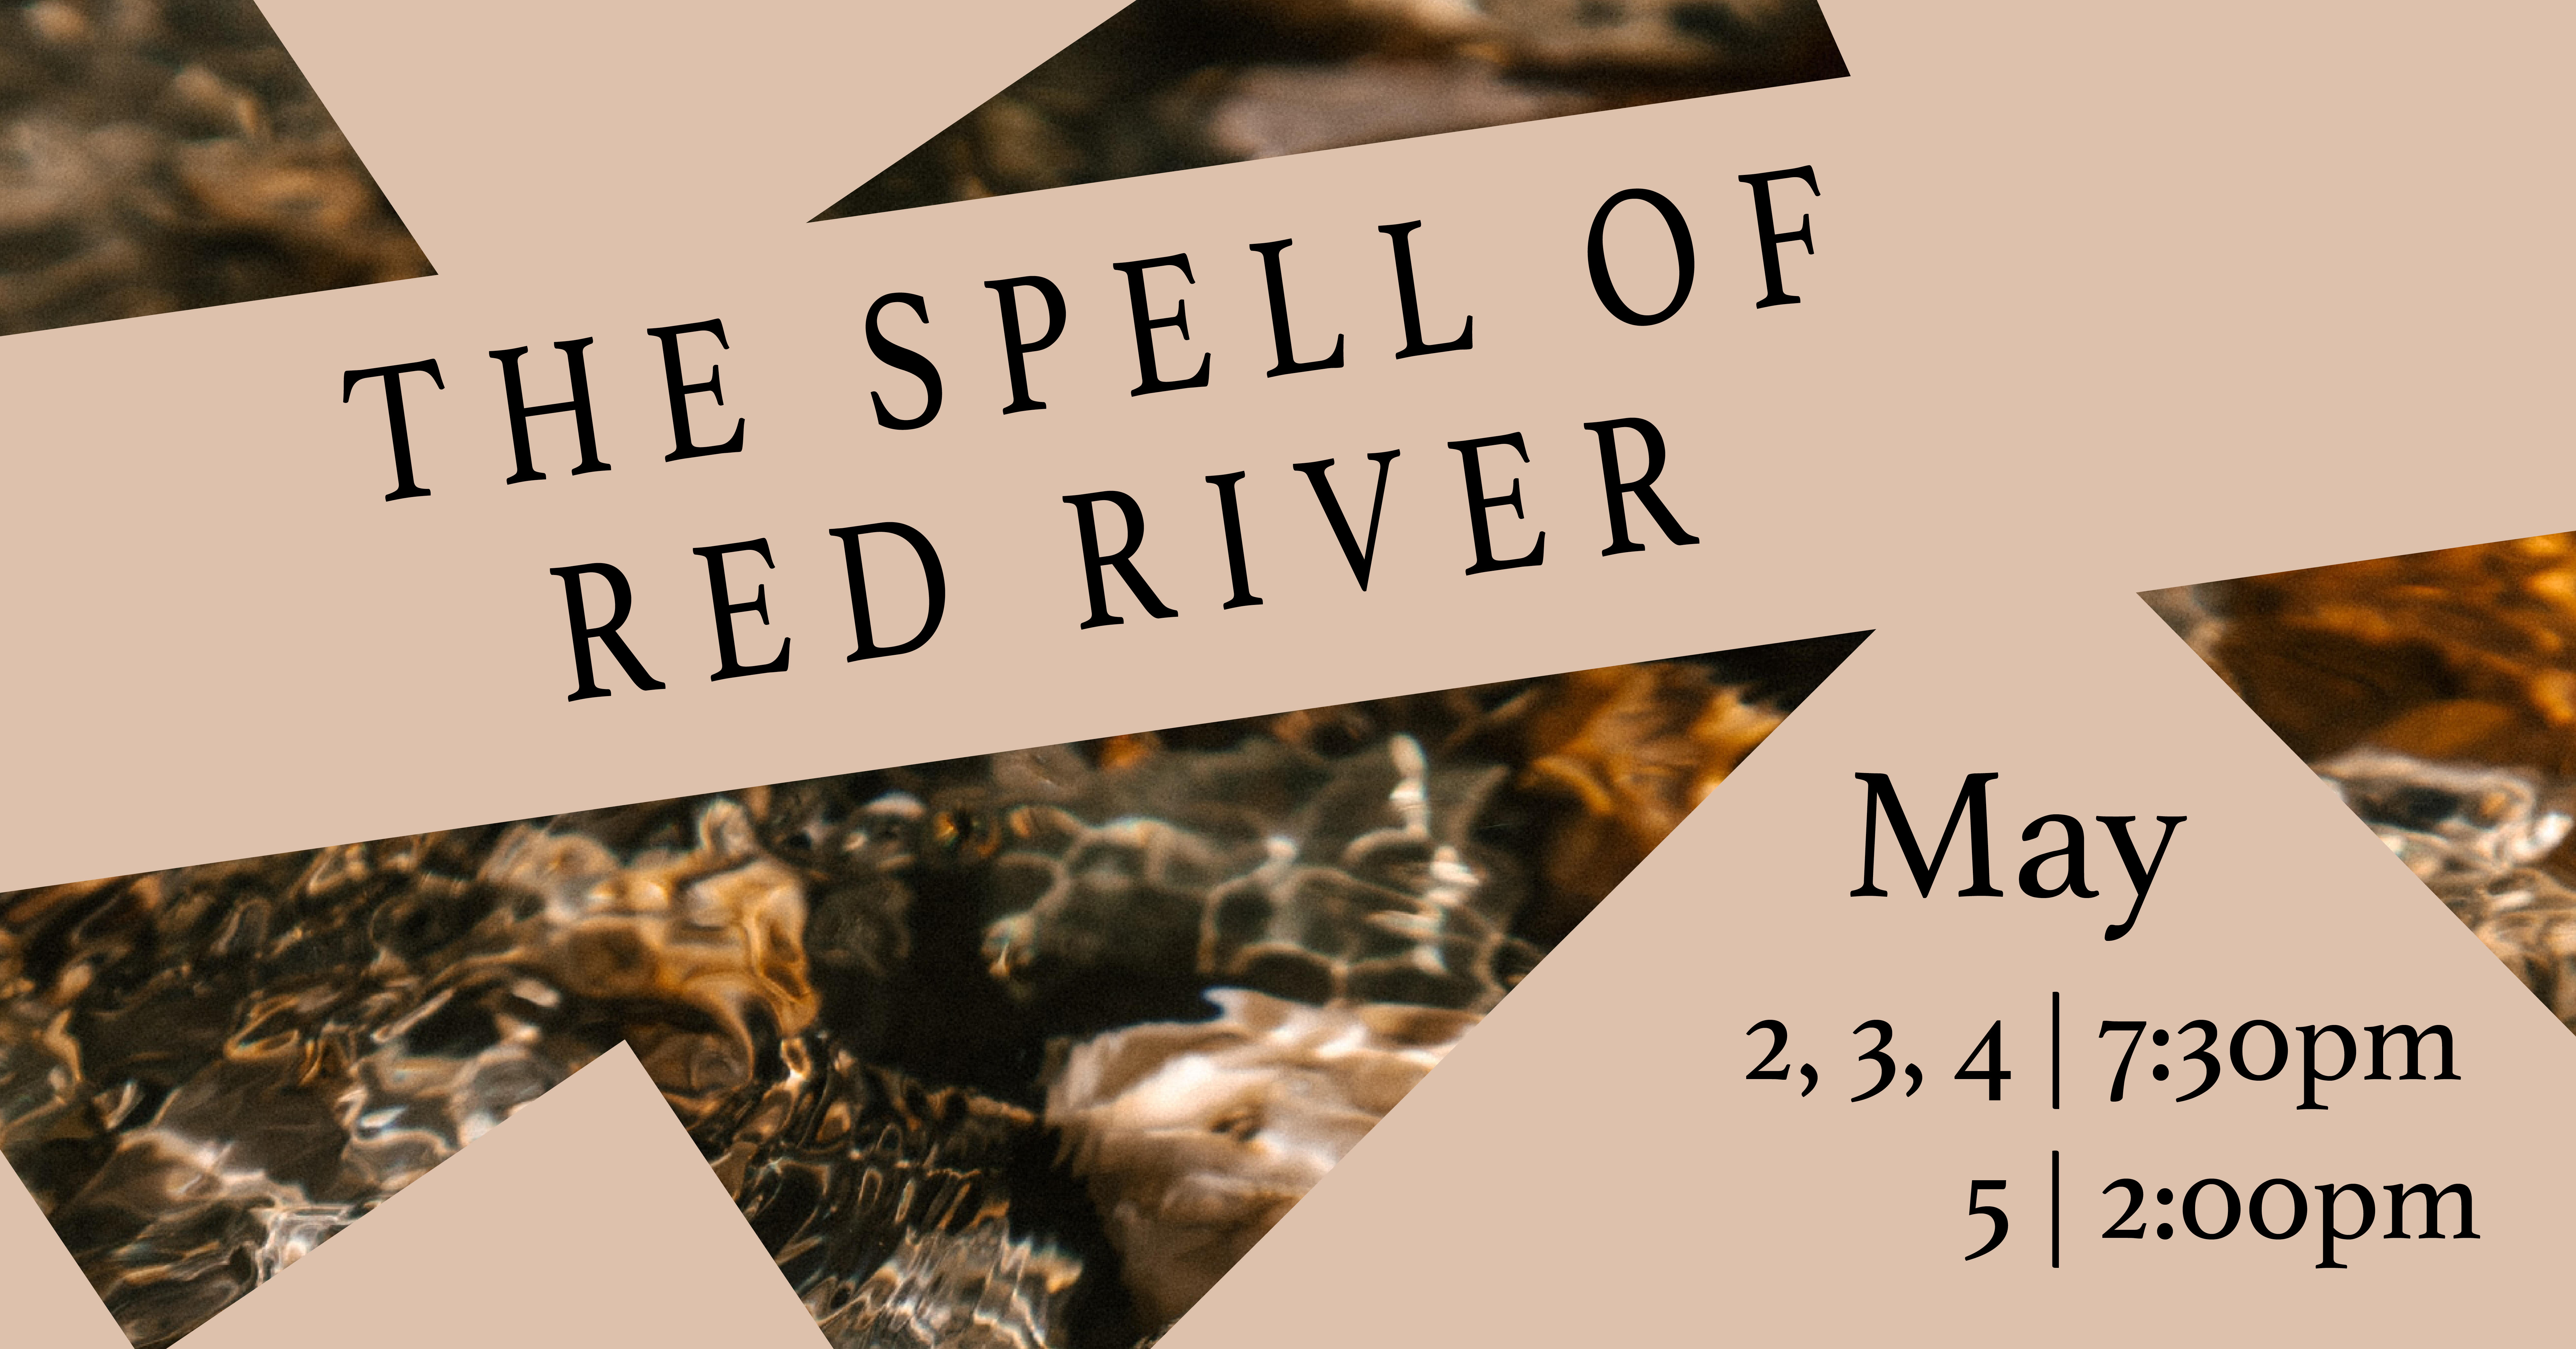 The Spell of Red River